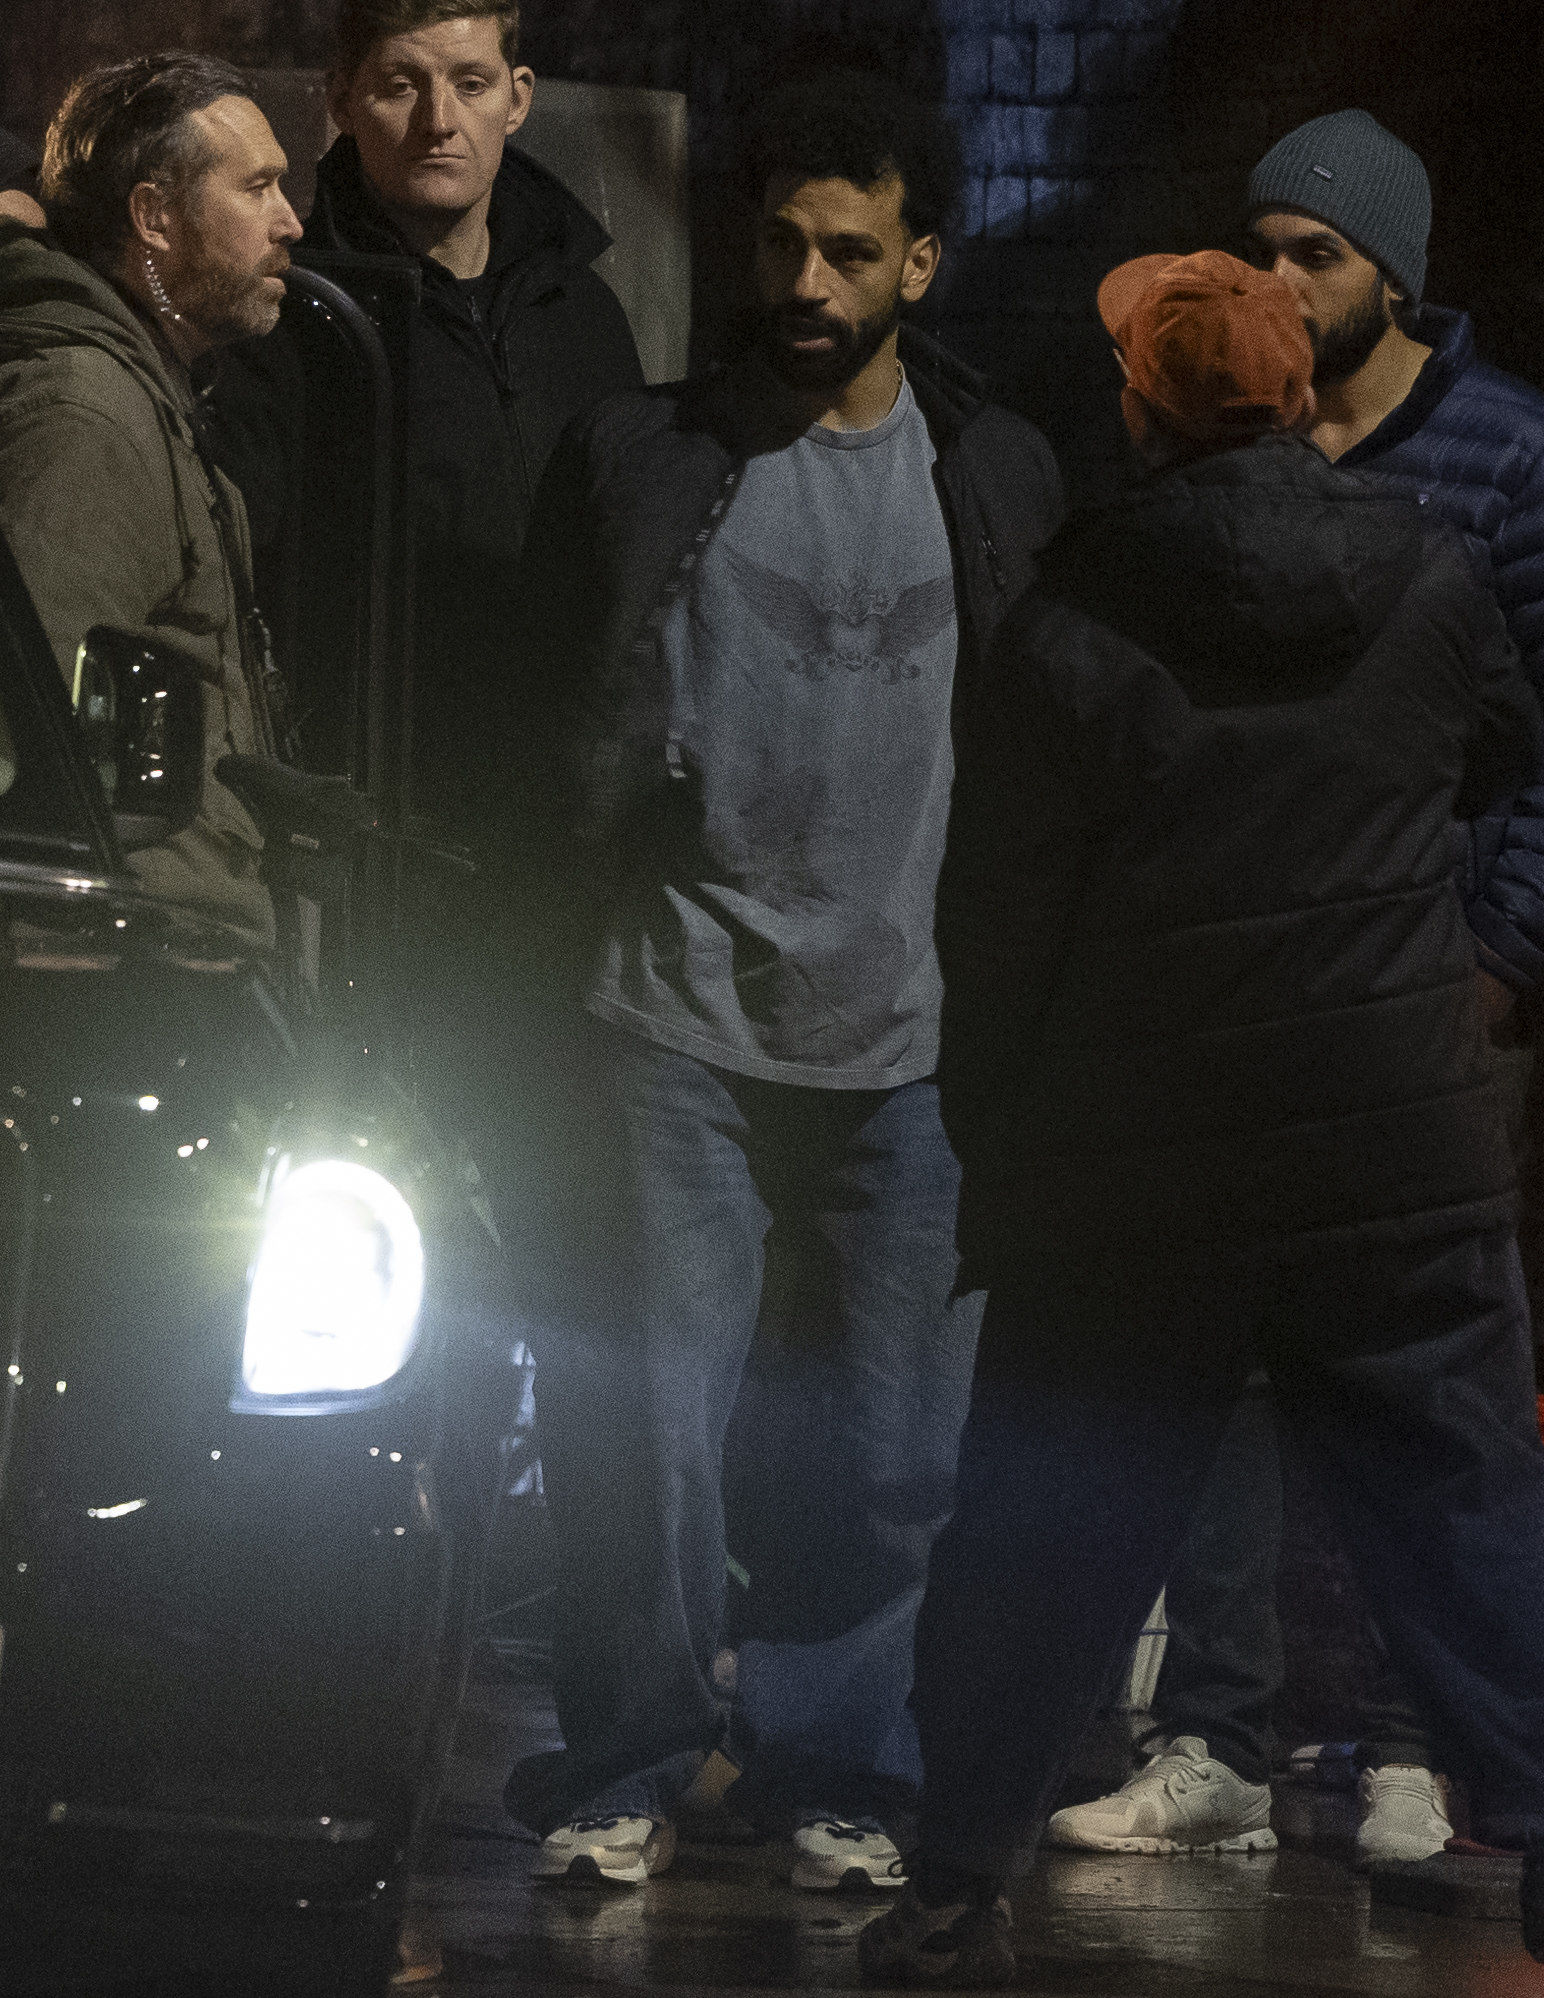 Salah sported a casual look for the filming